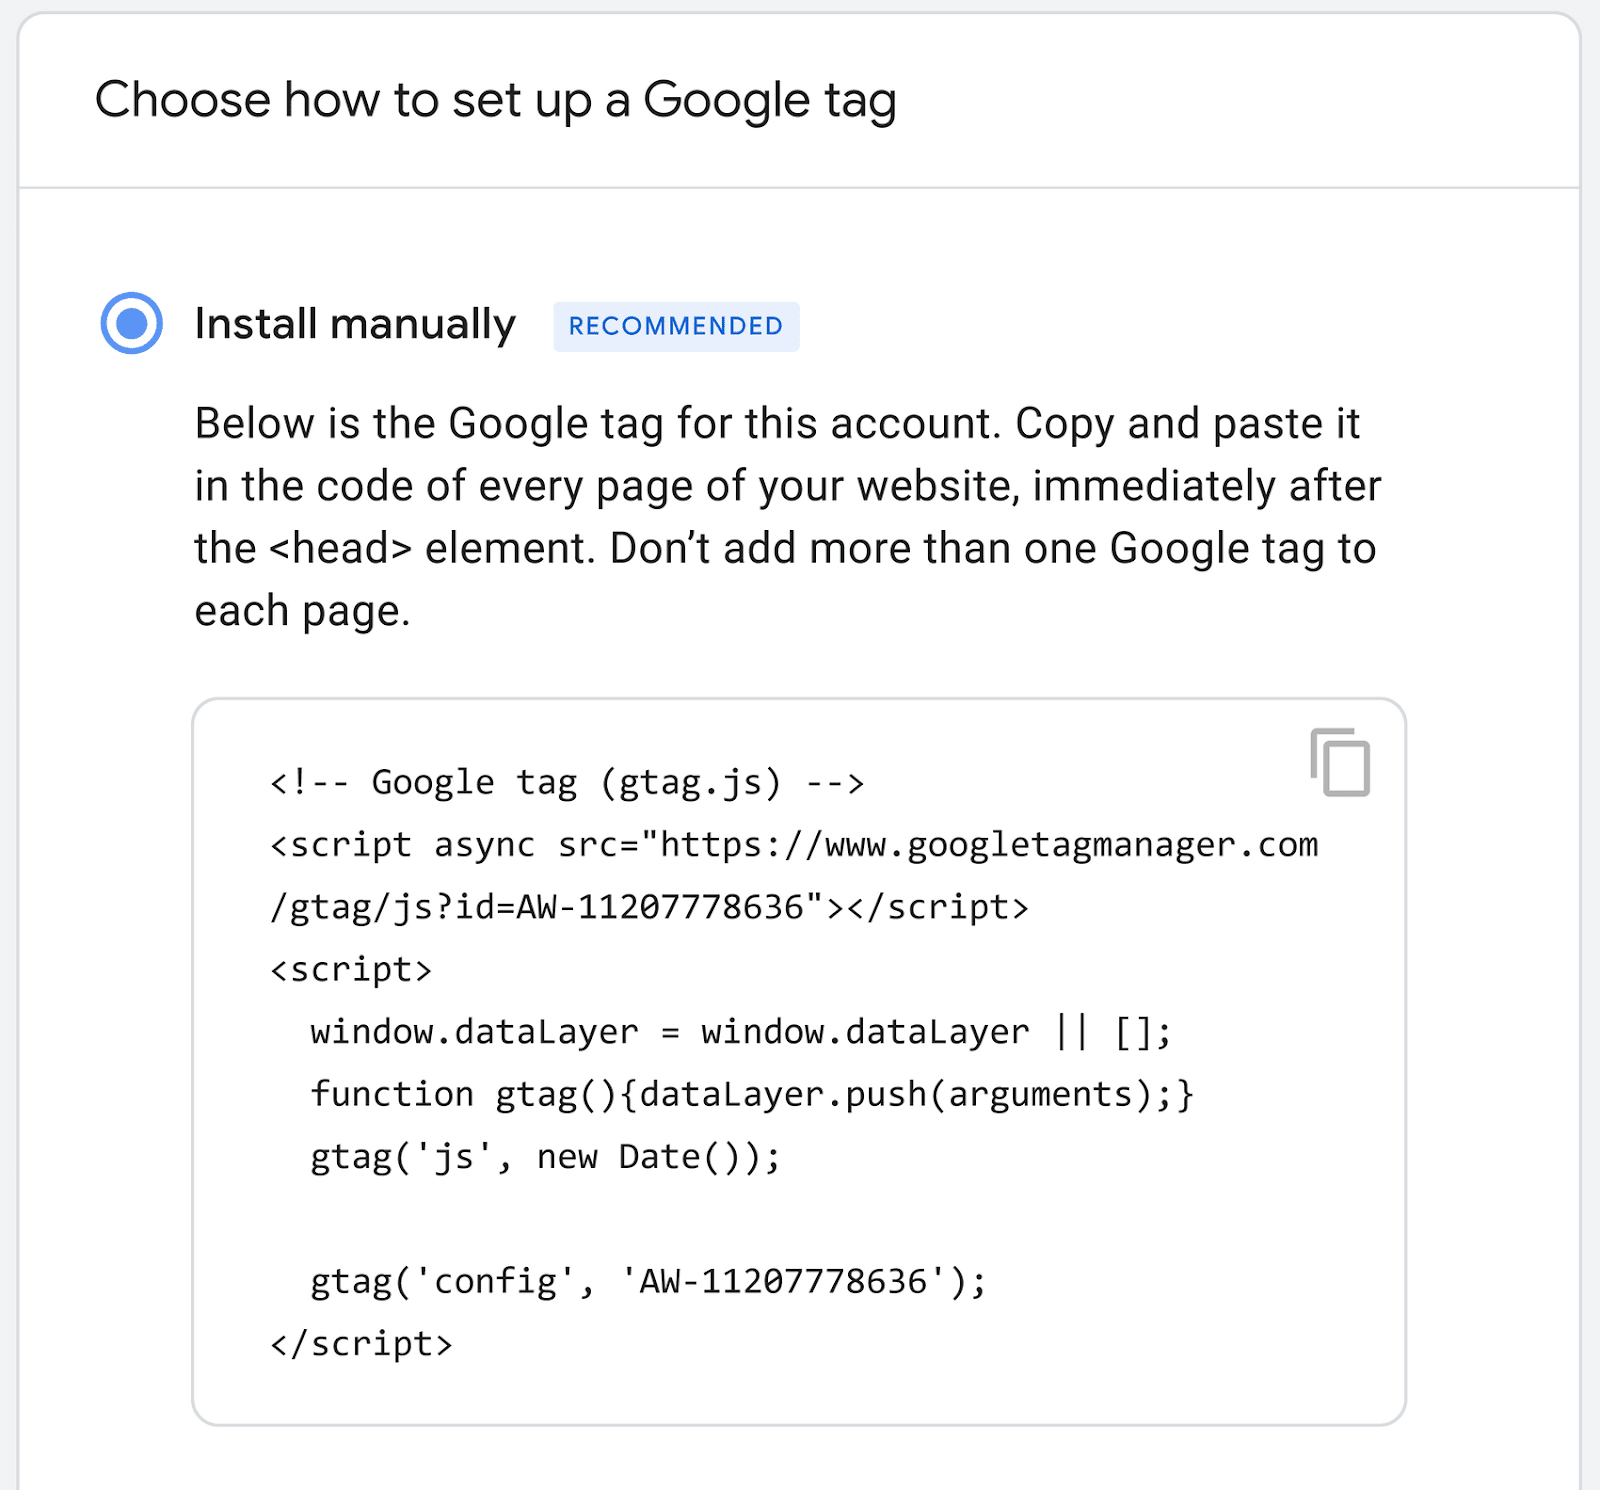 "Install manually" option selected under "Choose how to set up a Google tag" window